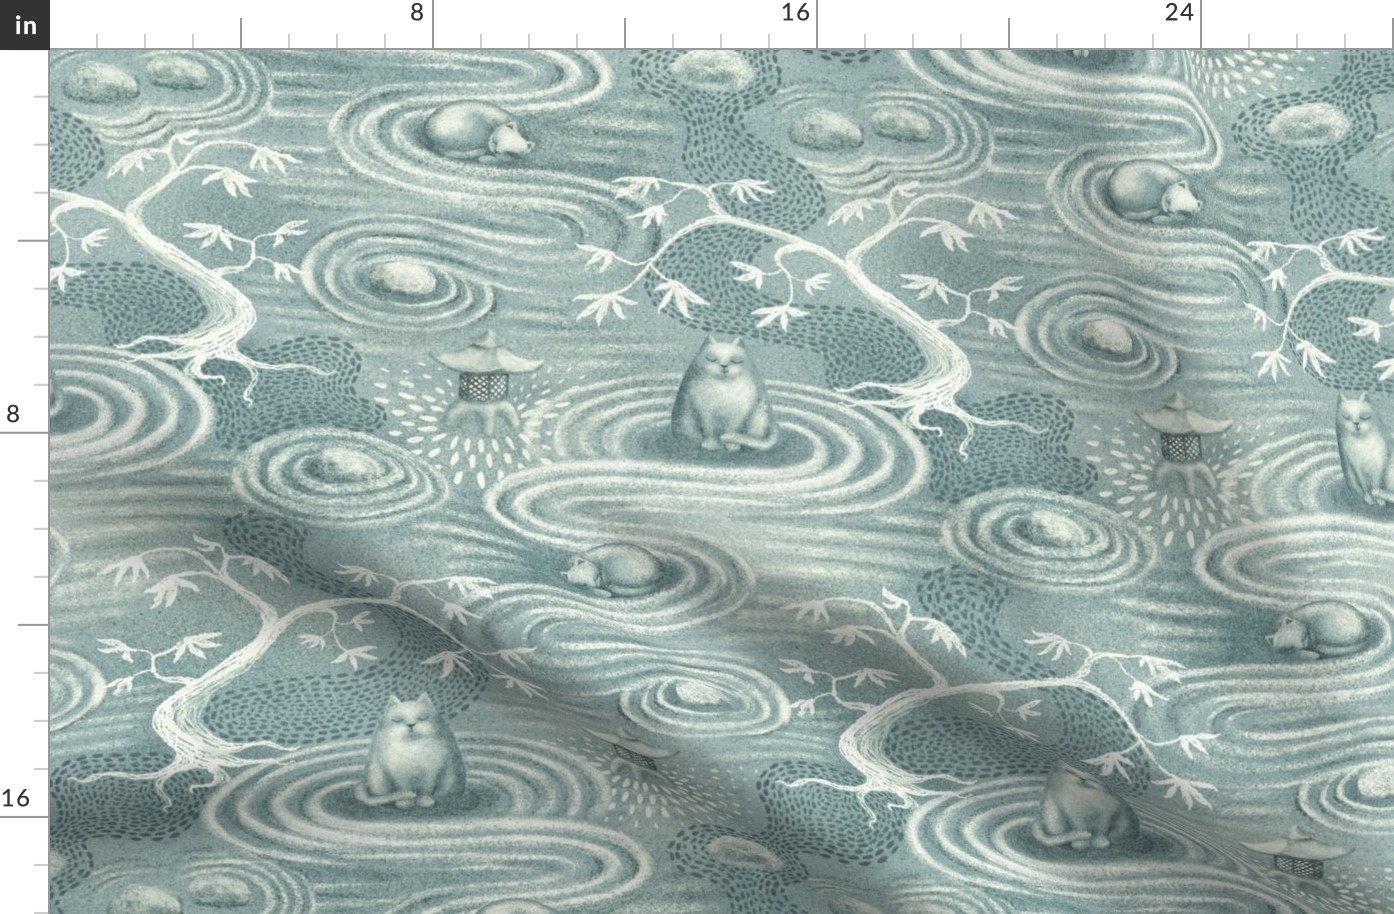 zen cats's garden wallpaper - grey blue and off-white - large scale